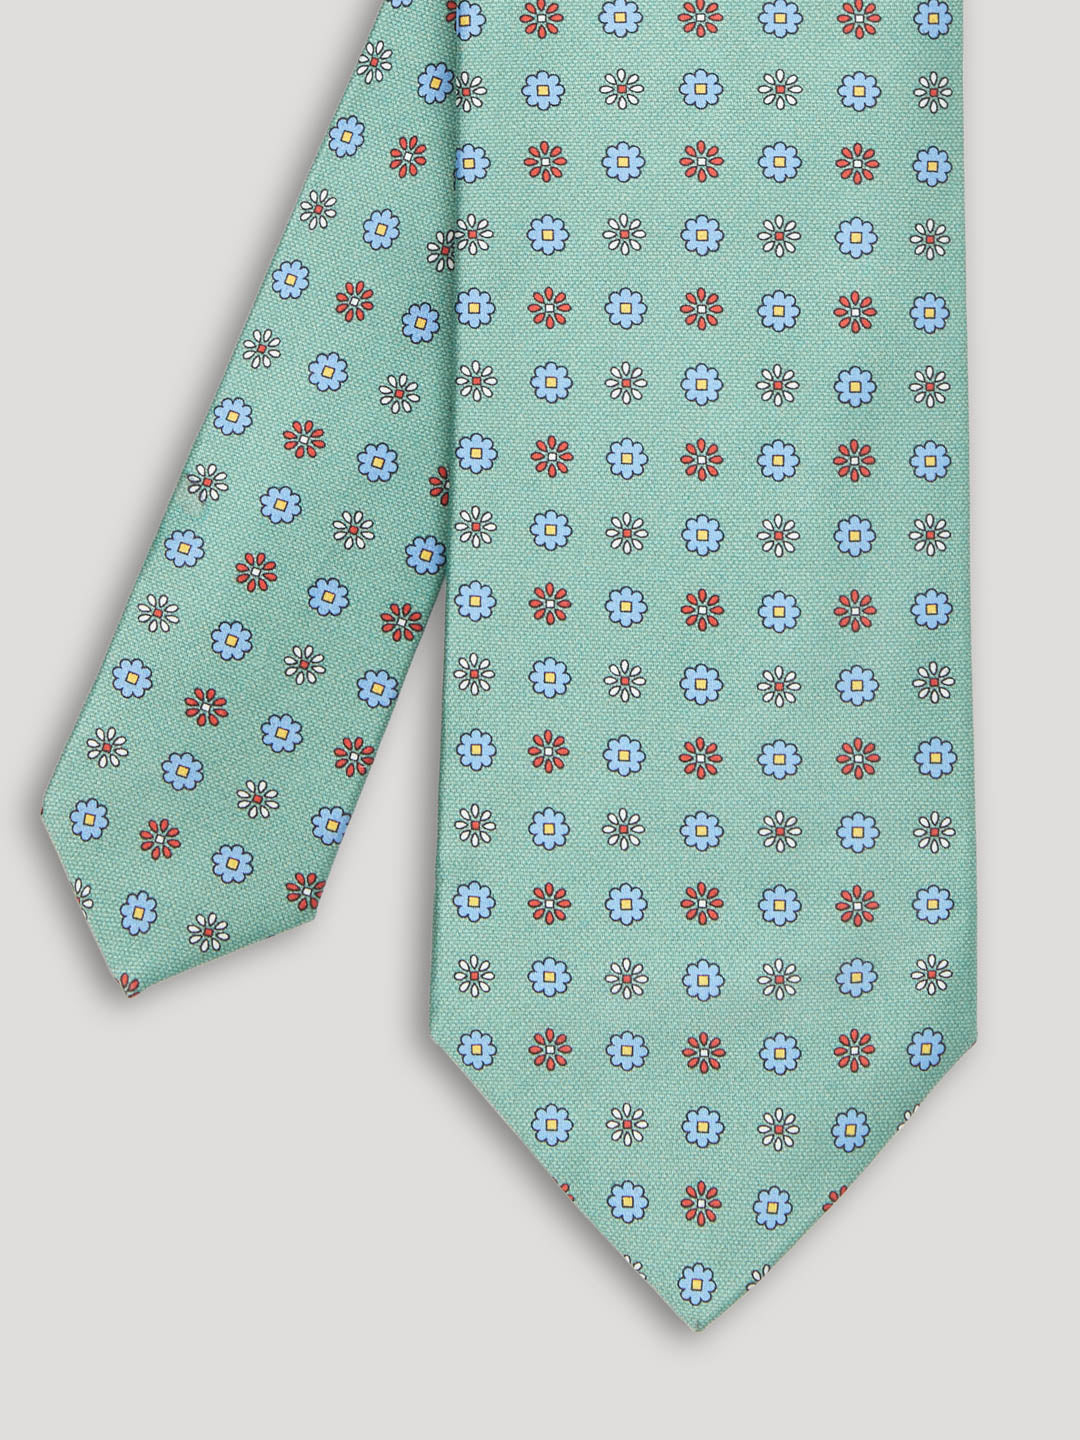 Red, green and blue silk tie with large pattern